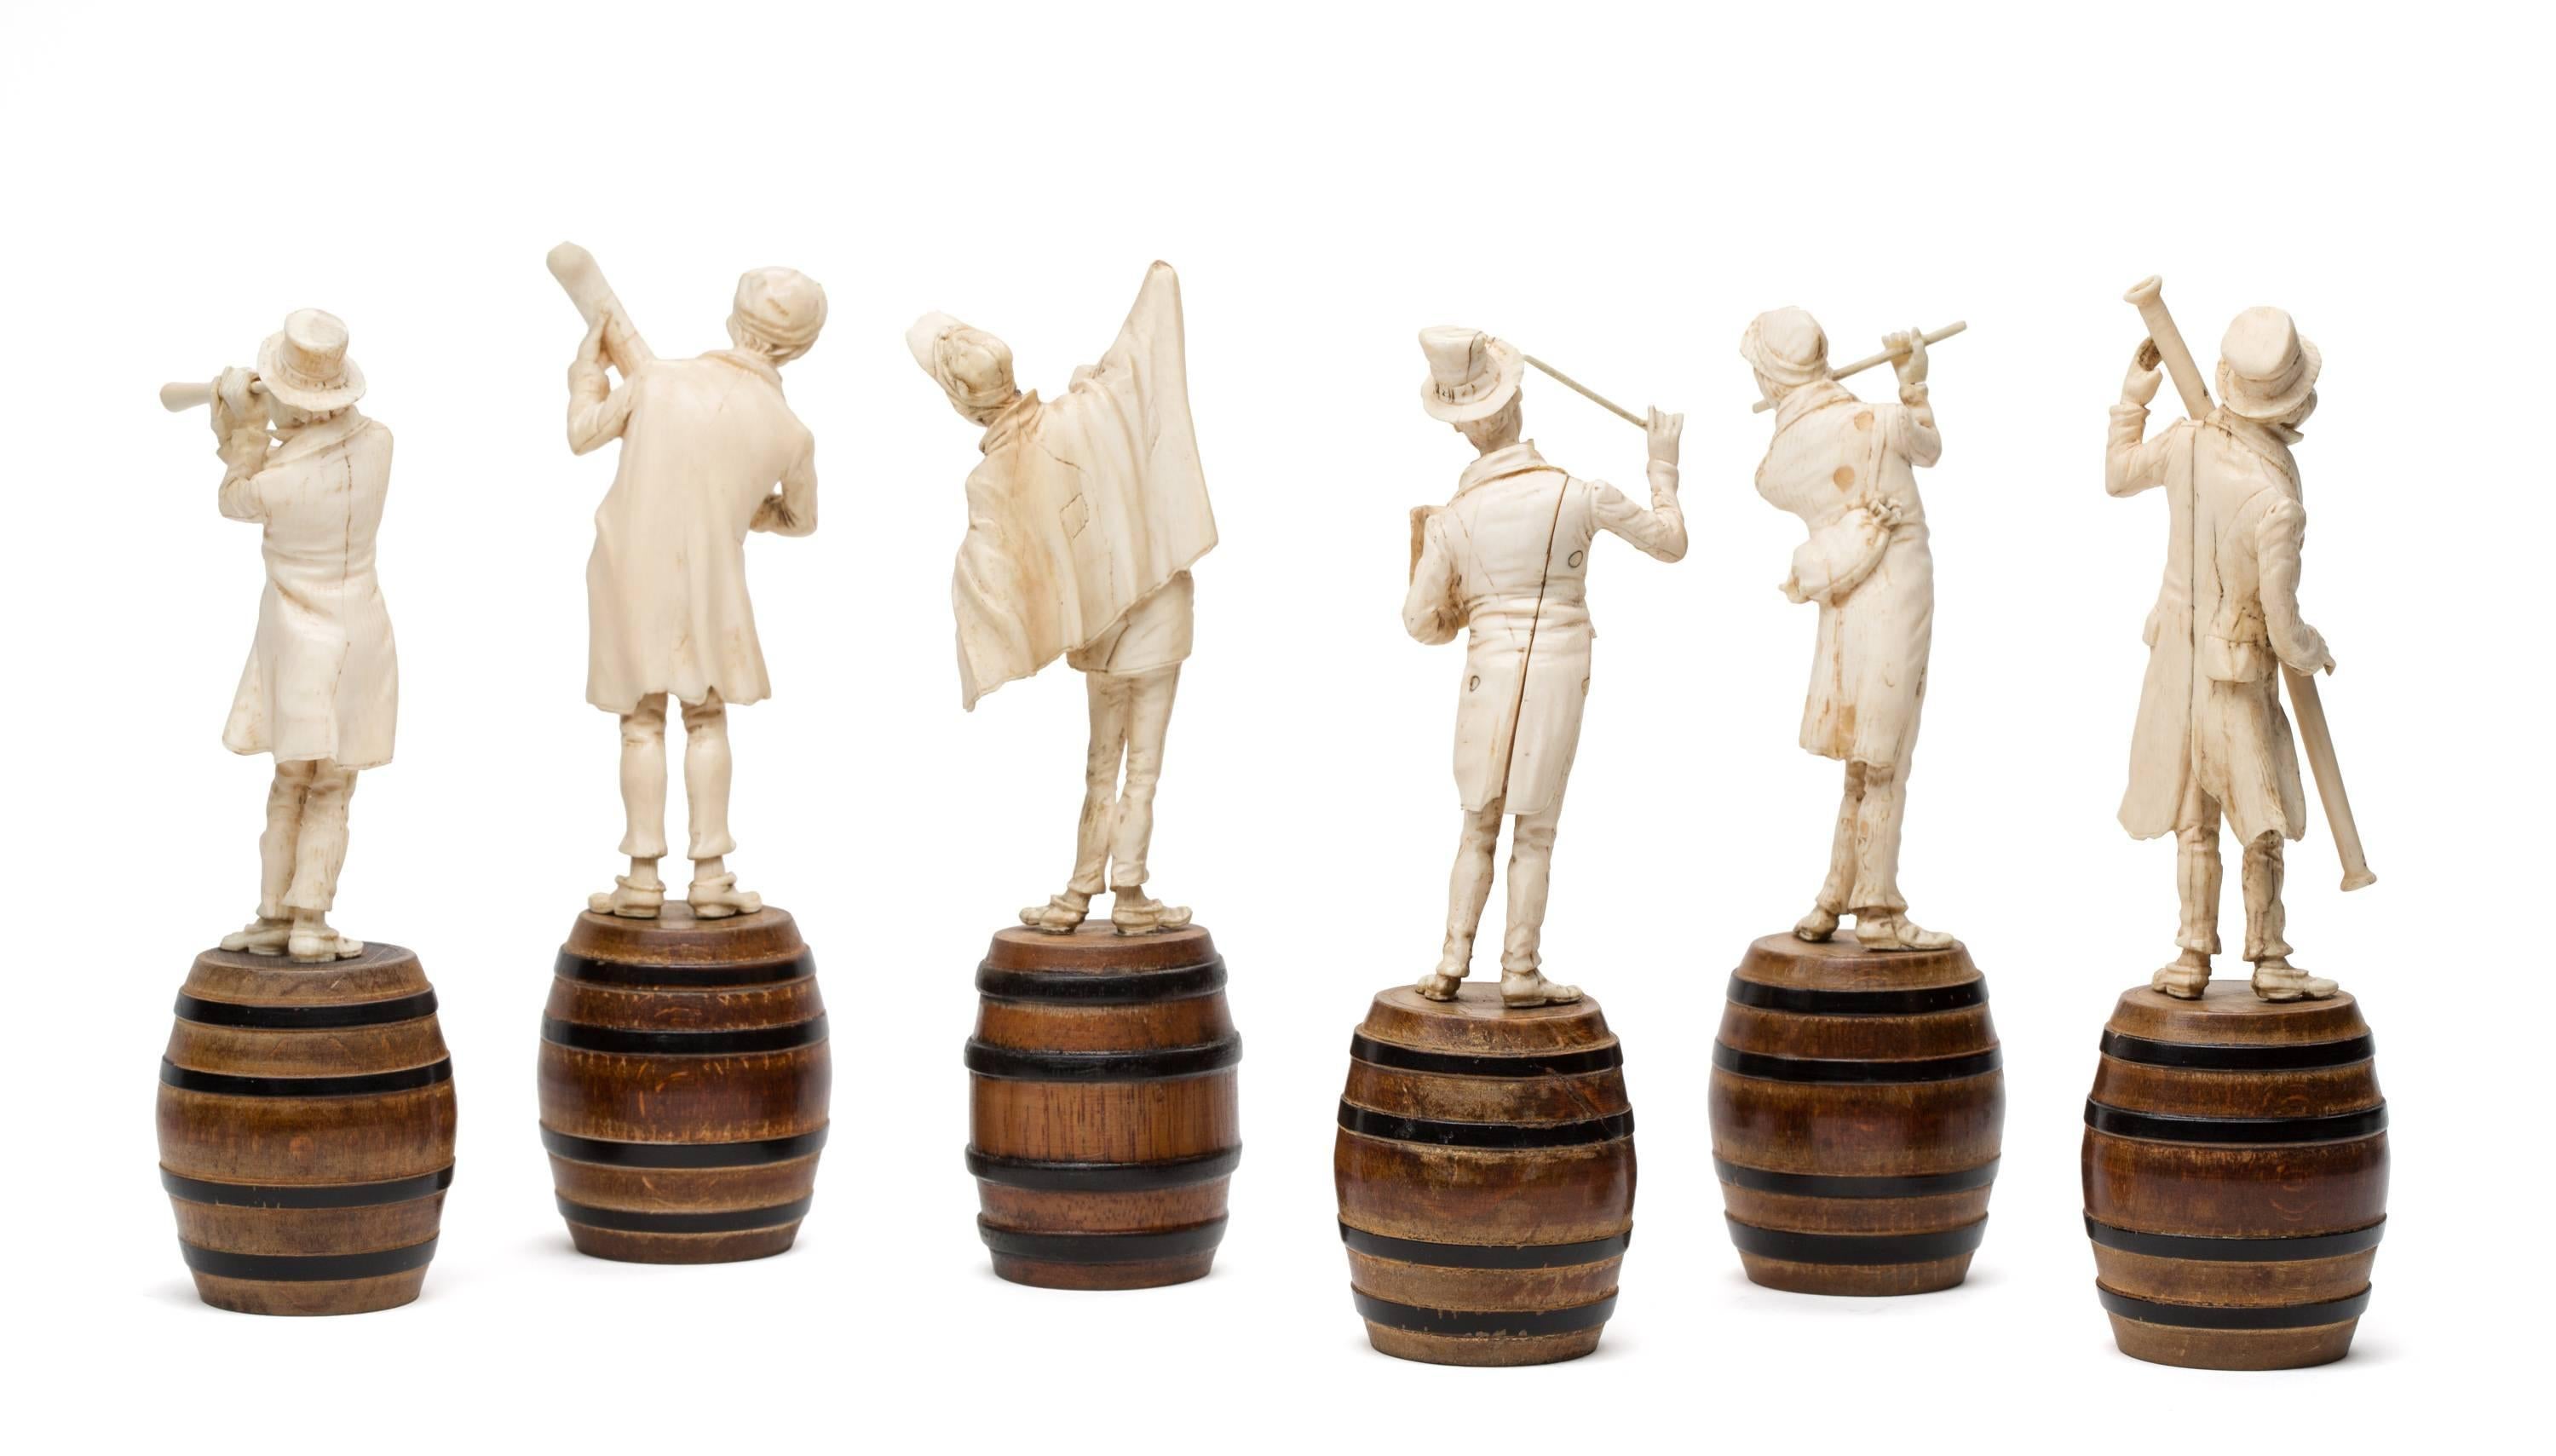 A group of six South German or Austrian hand-carved ivory musicians. The work is particularly fine, and the figures are outstanding examples of this genre. All are in very good condition, though the bassoon player is missing his mouthpiece, and the